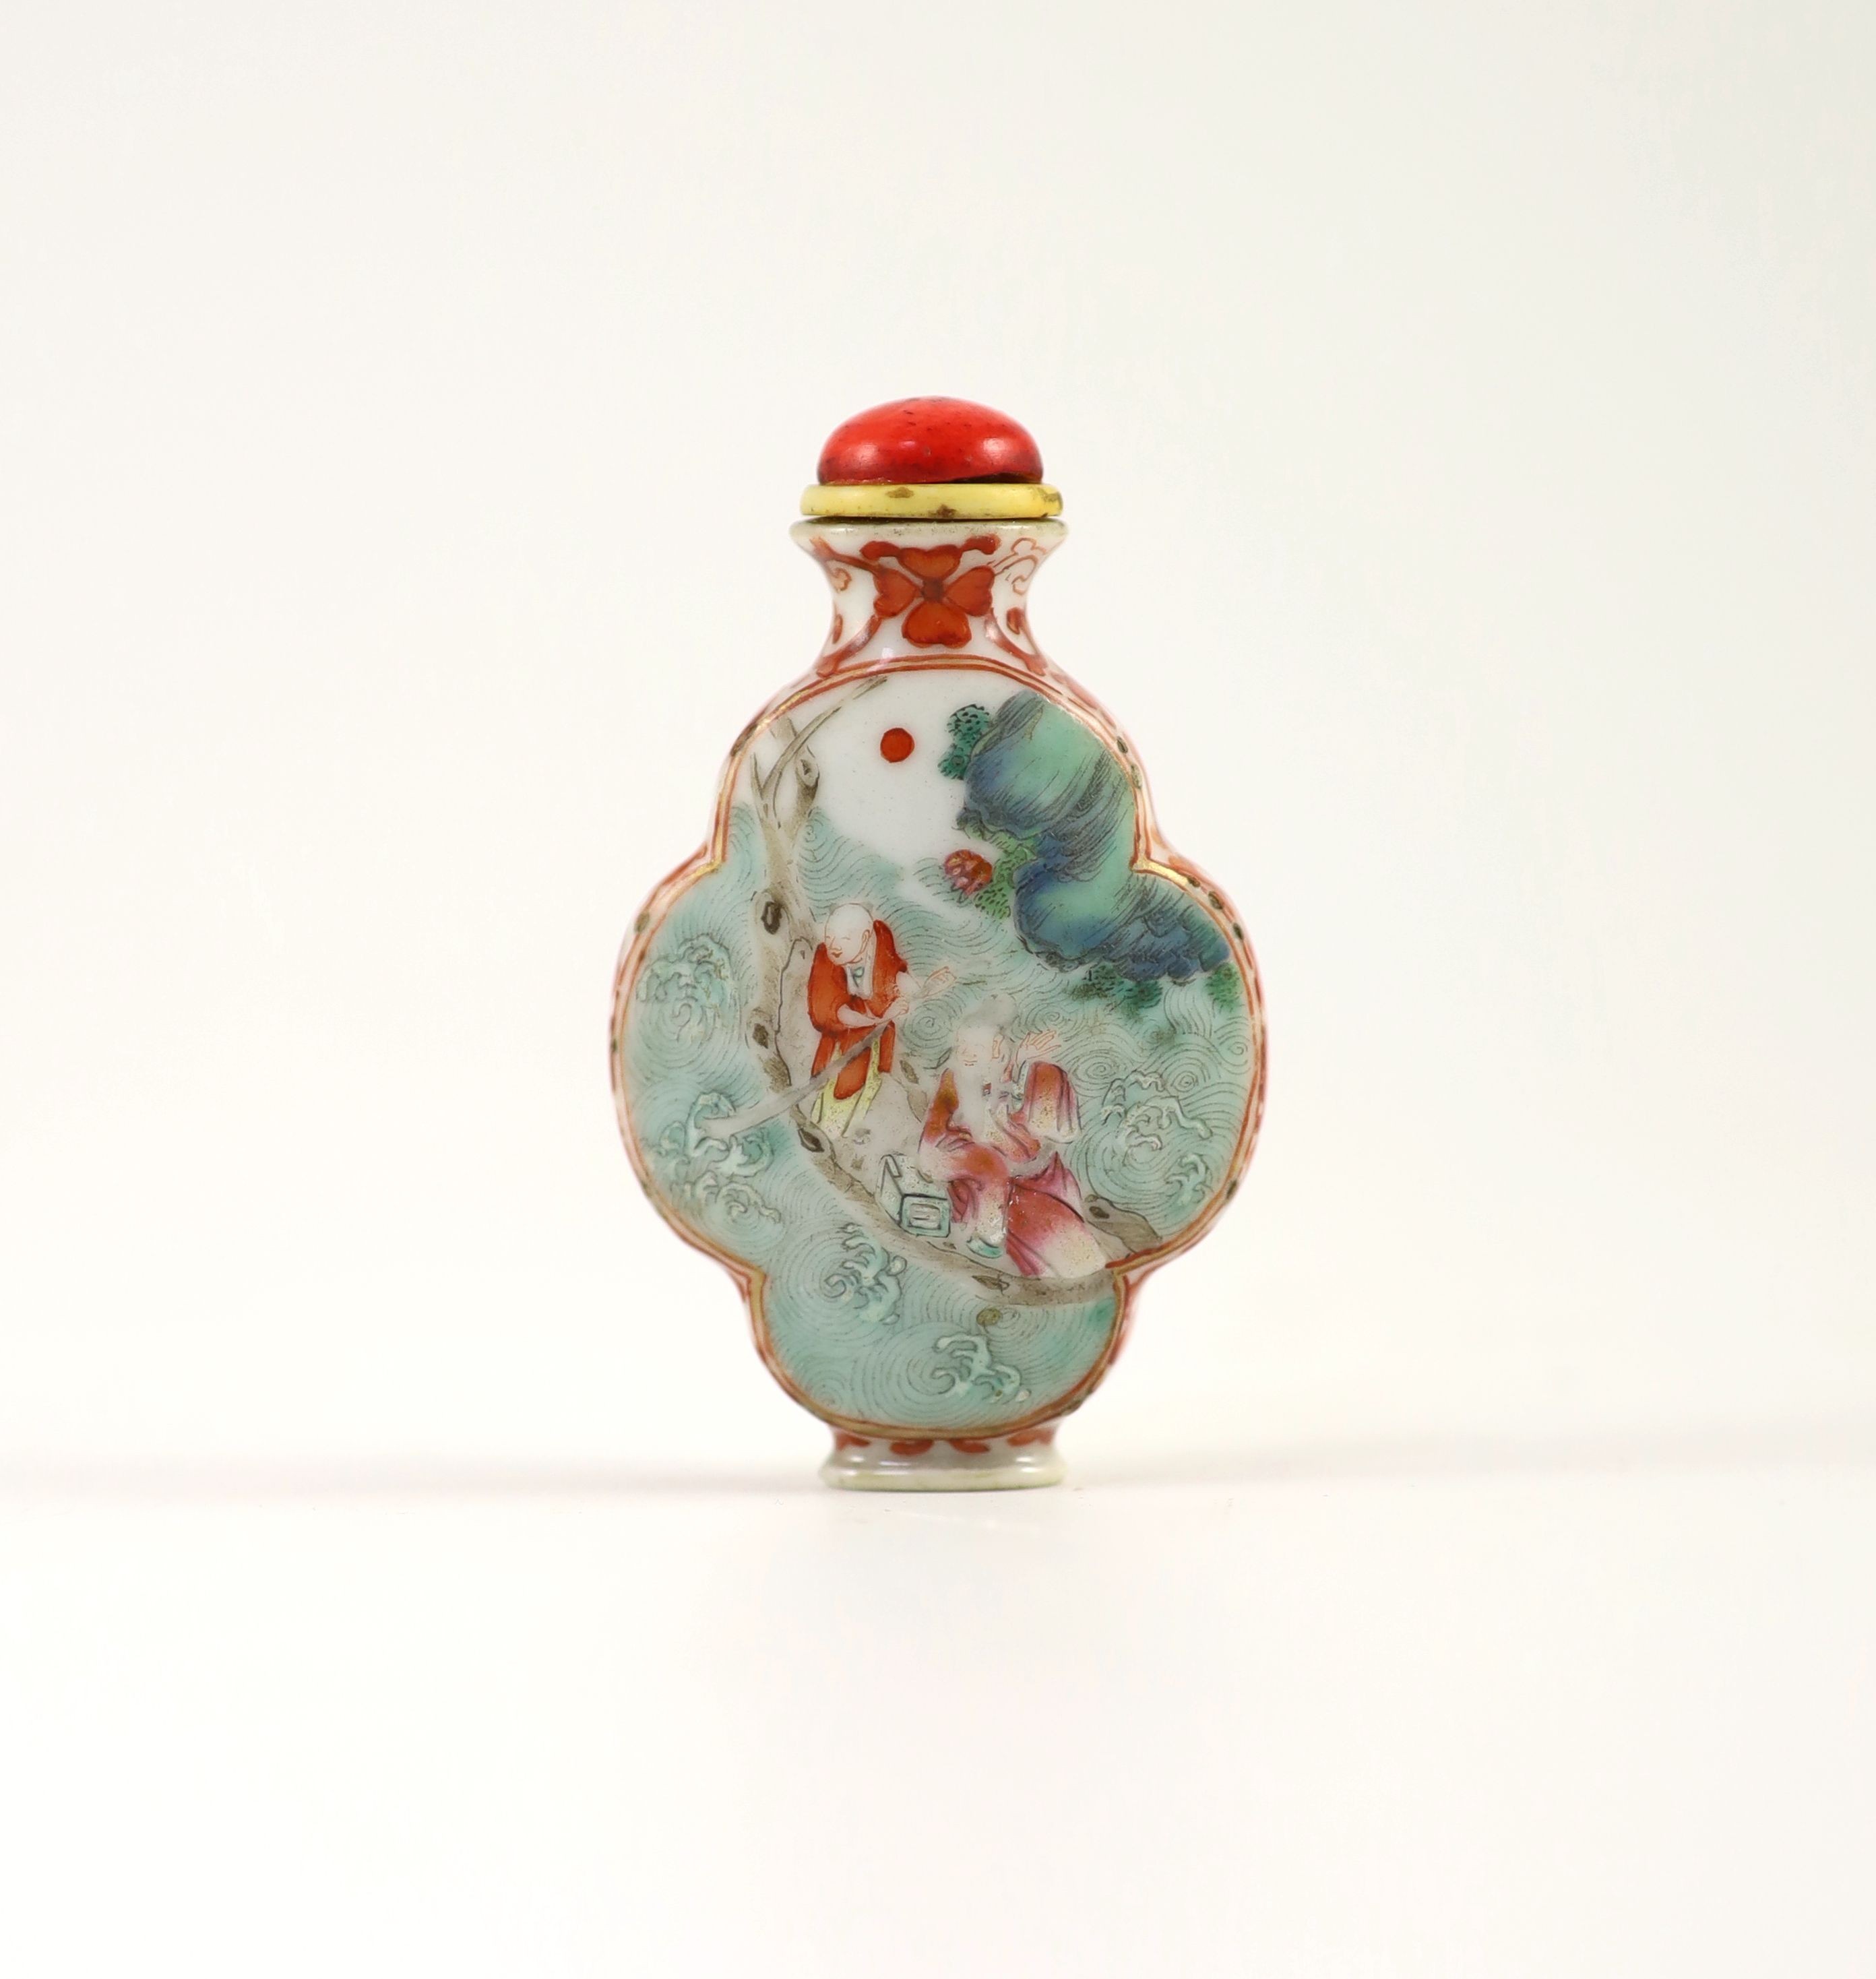 A Chinese famille rose snuff bottle, Jiaqing four character seal mark and period (1796-1820), 6 cm high excluding stopper, restoration